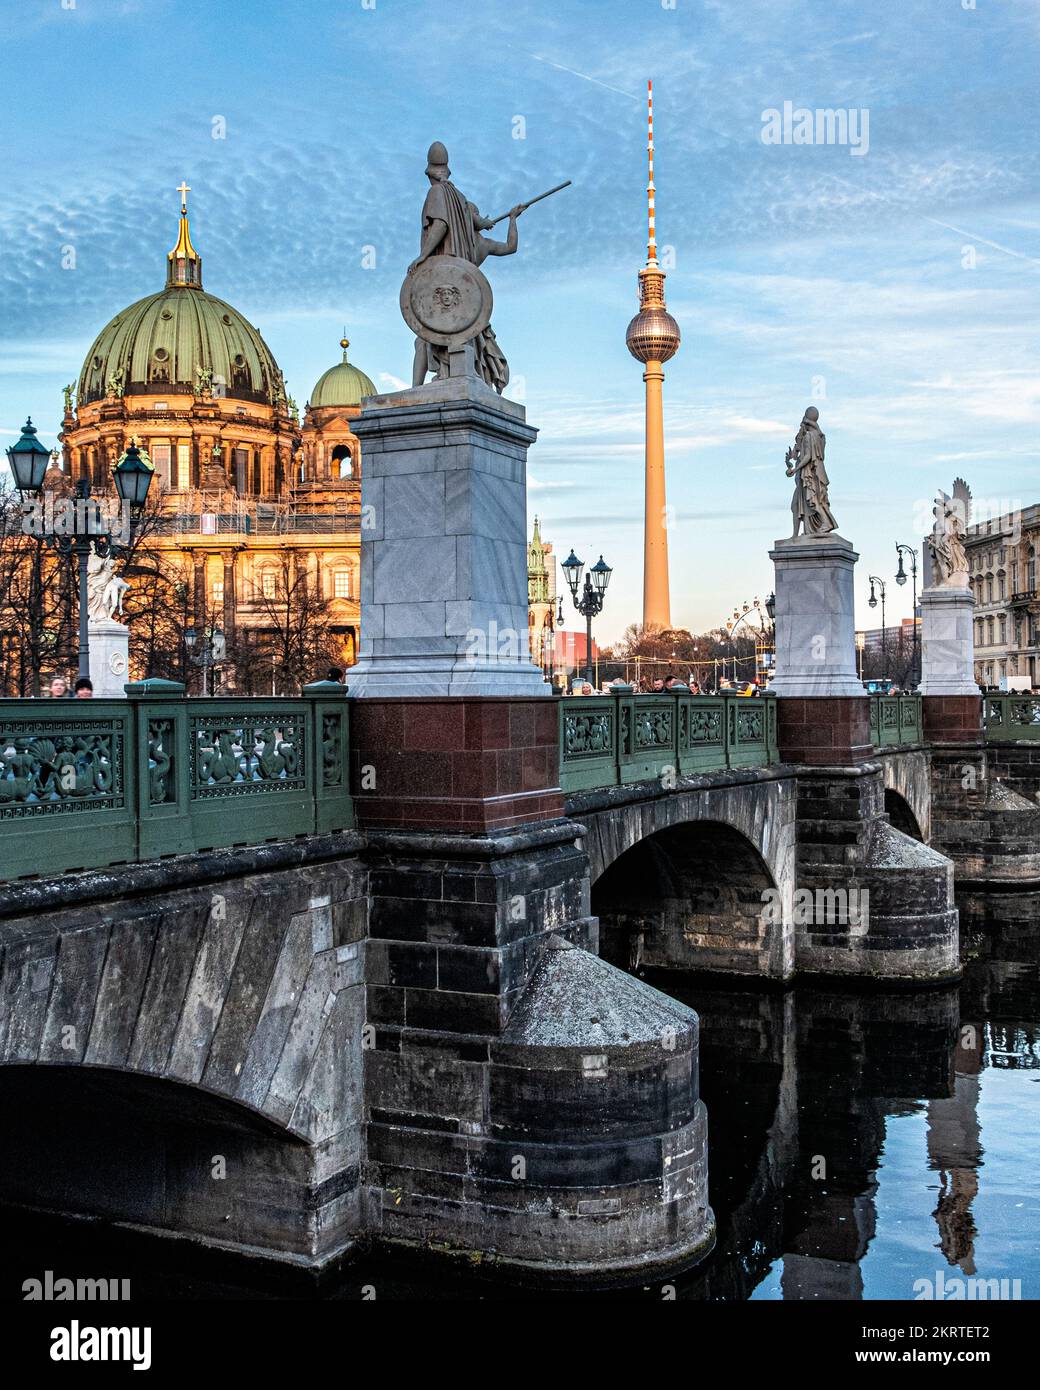 Berlin, Mitte, Schloss bridge with marble sculptures, Dome of Berlin Cathedral and Television Tower,Urban view Stock Photo